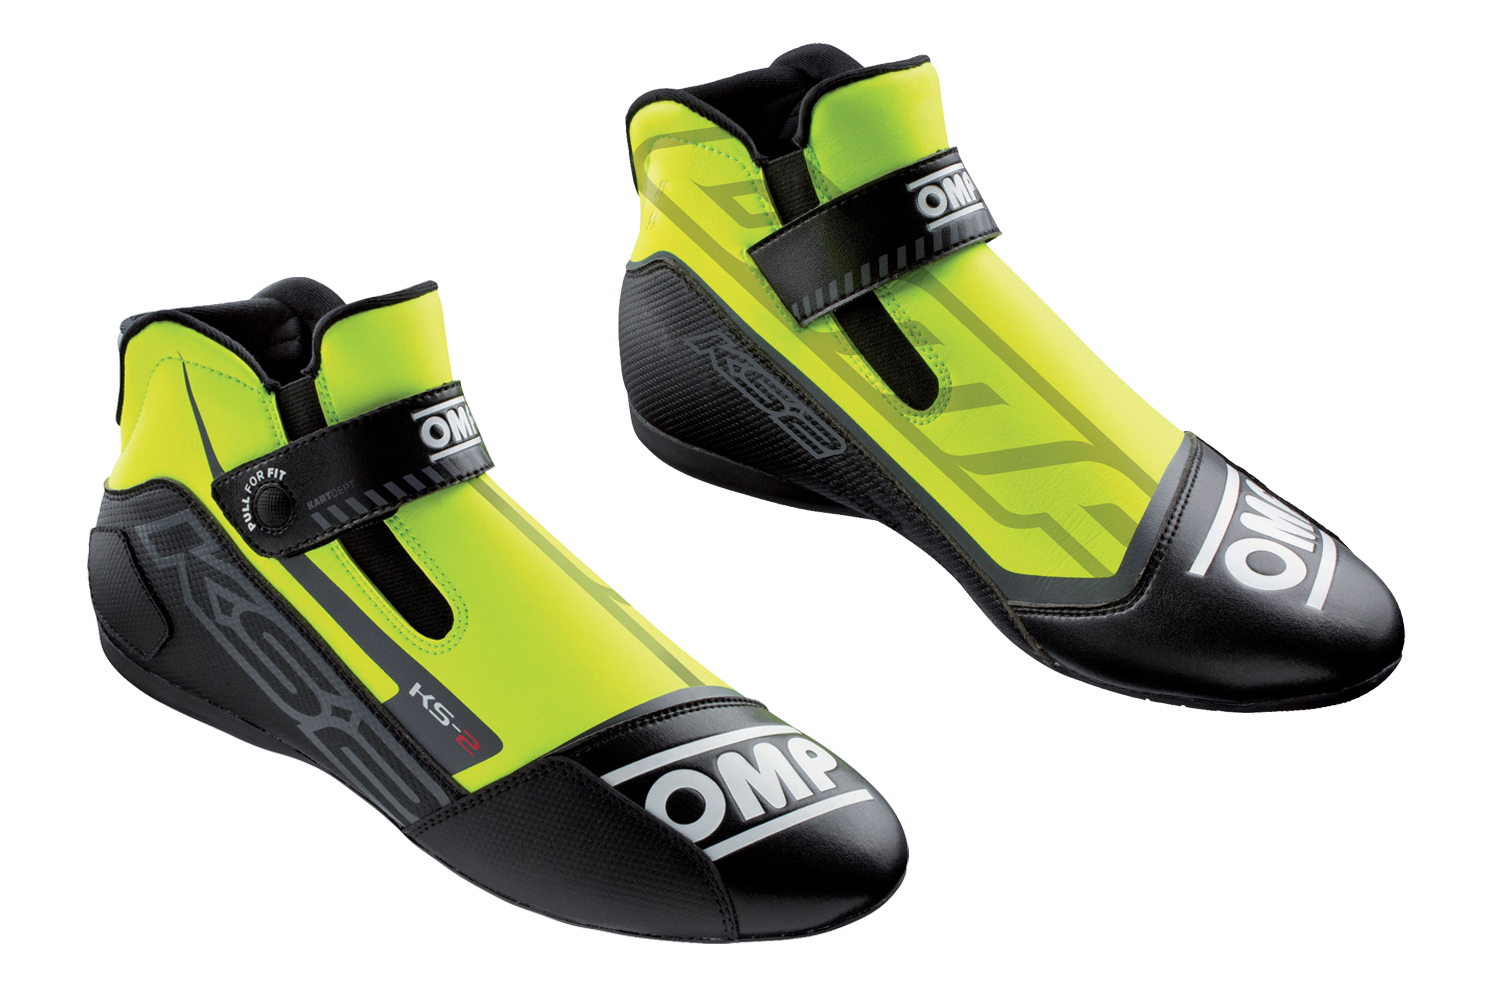 OMP Racing IC82505945 Driving Shoe, KS-2, Mid-Top, FIA Approved, Suede Leather Outer, Fire Retardant Fabric Inner, Fluorescent Yellow / Black, Euro Size 45, Pair